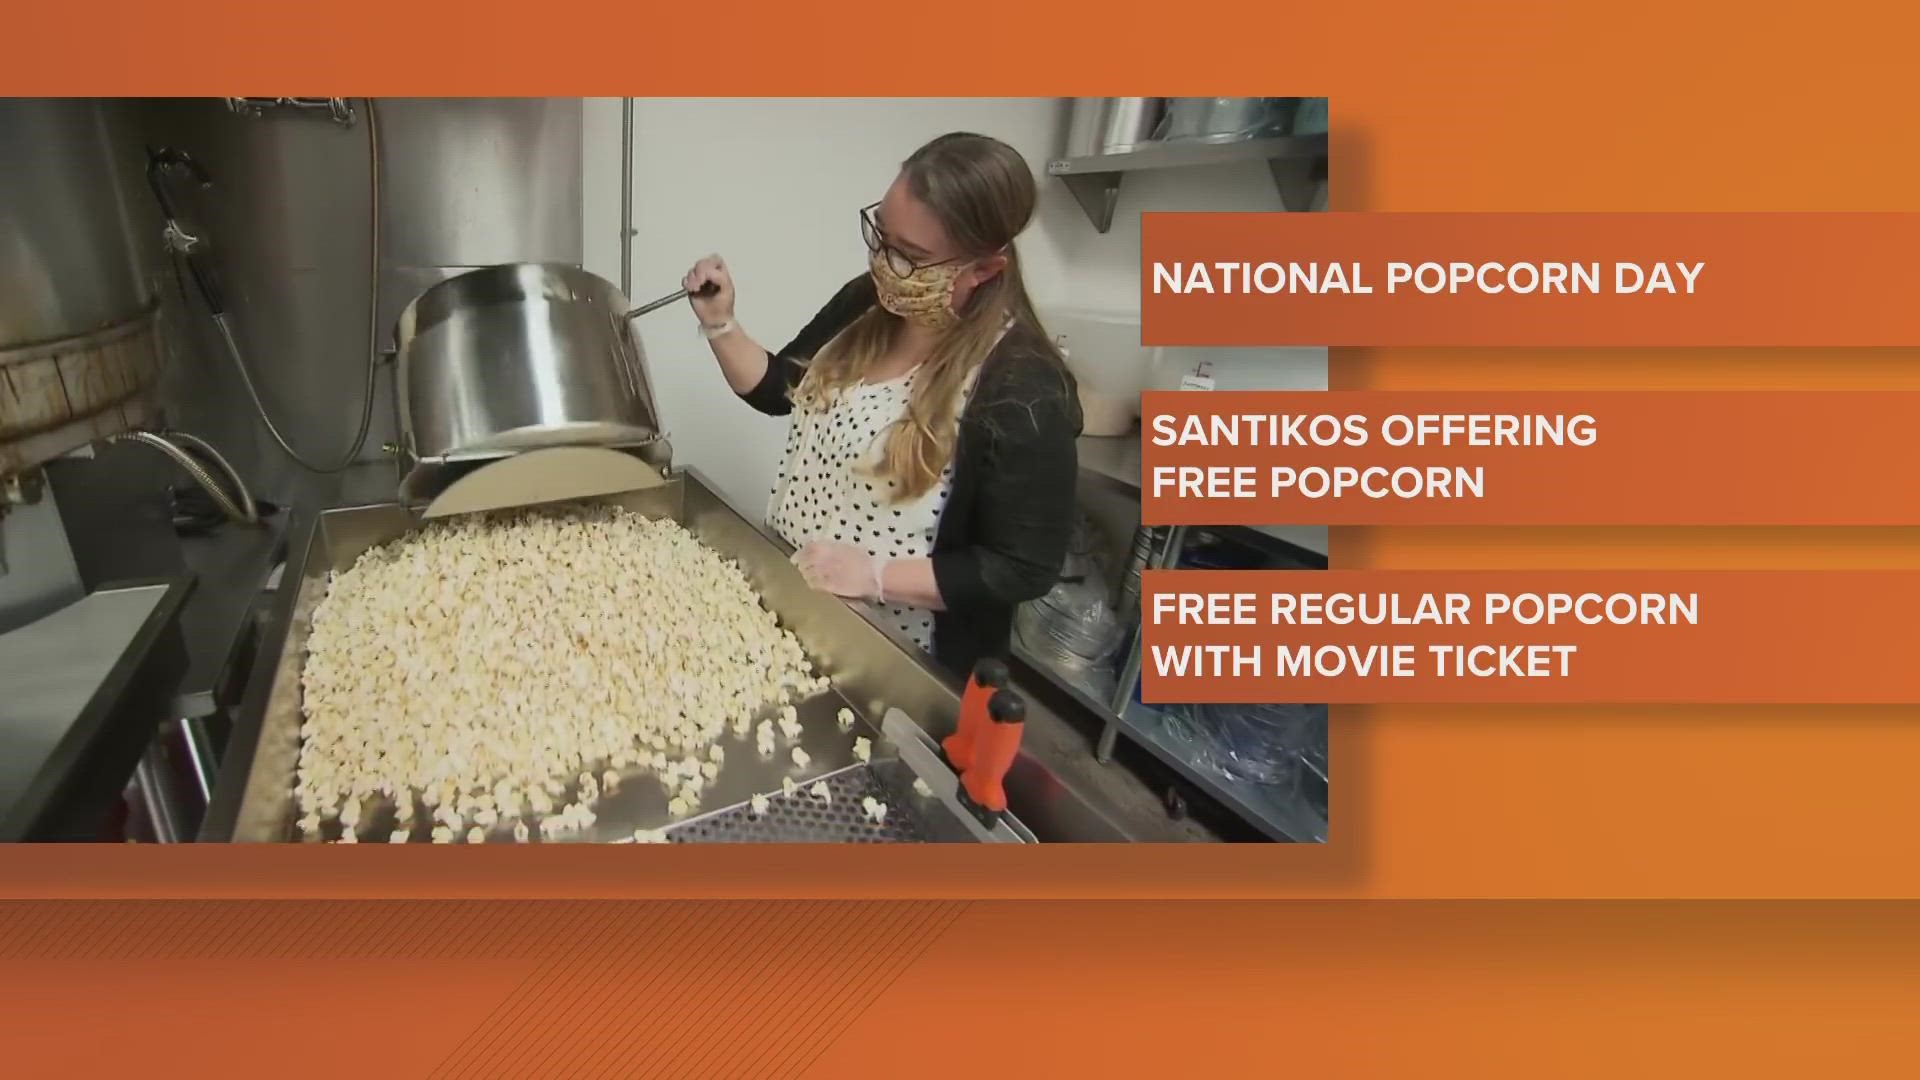 A recent survey found that 83% of folks think movie theater popcorn just tatstes better.